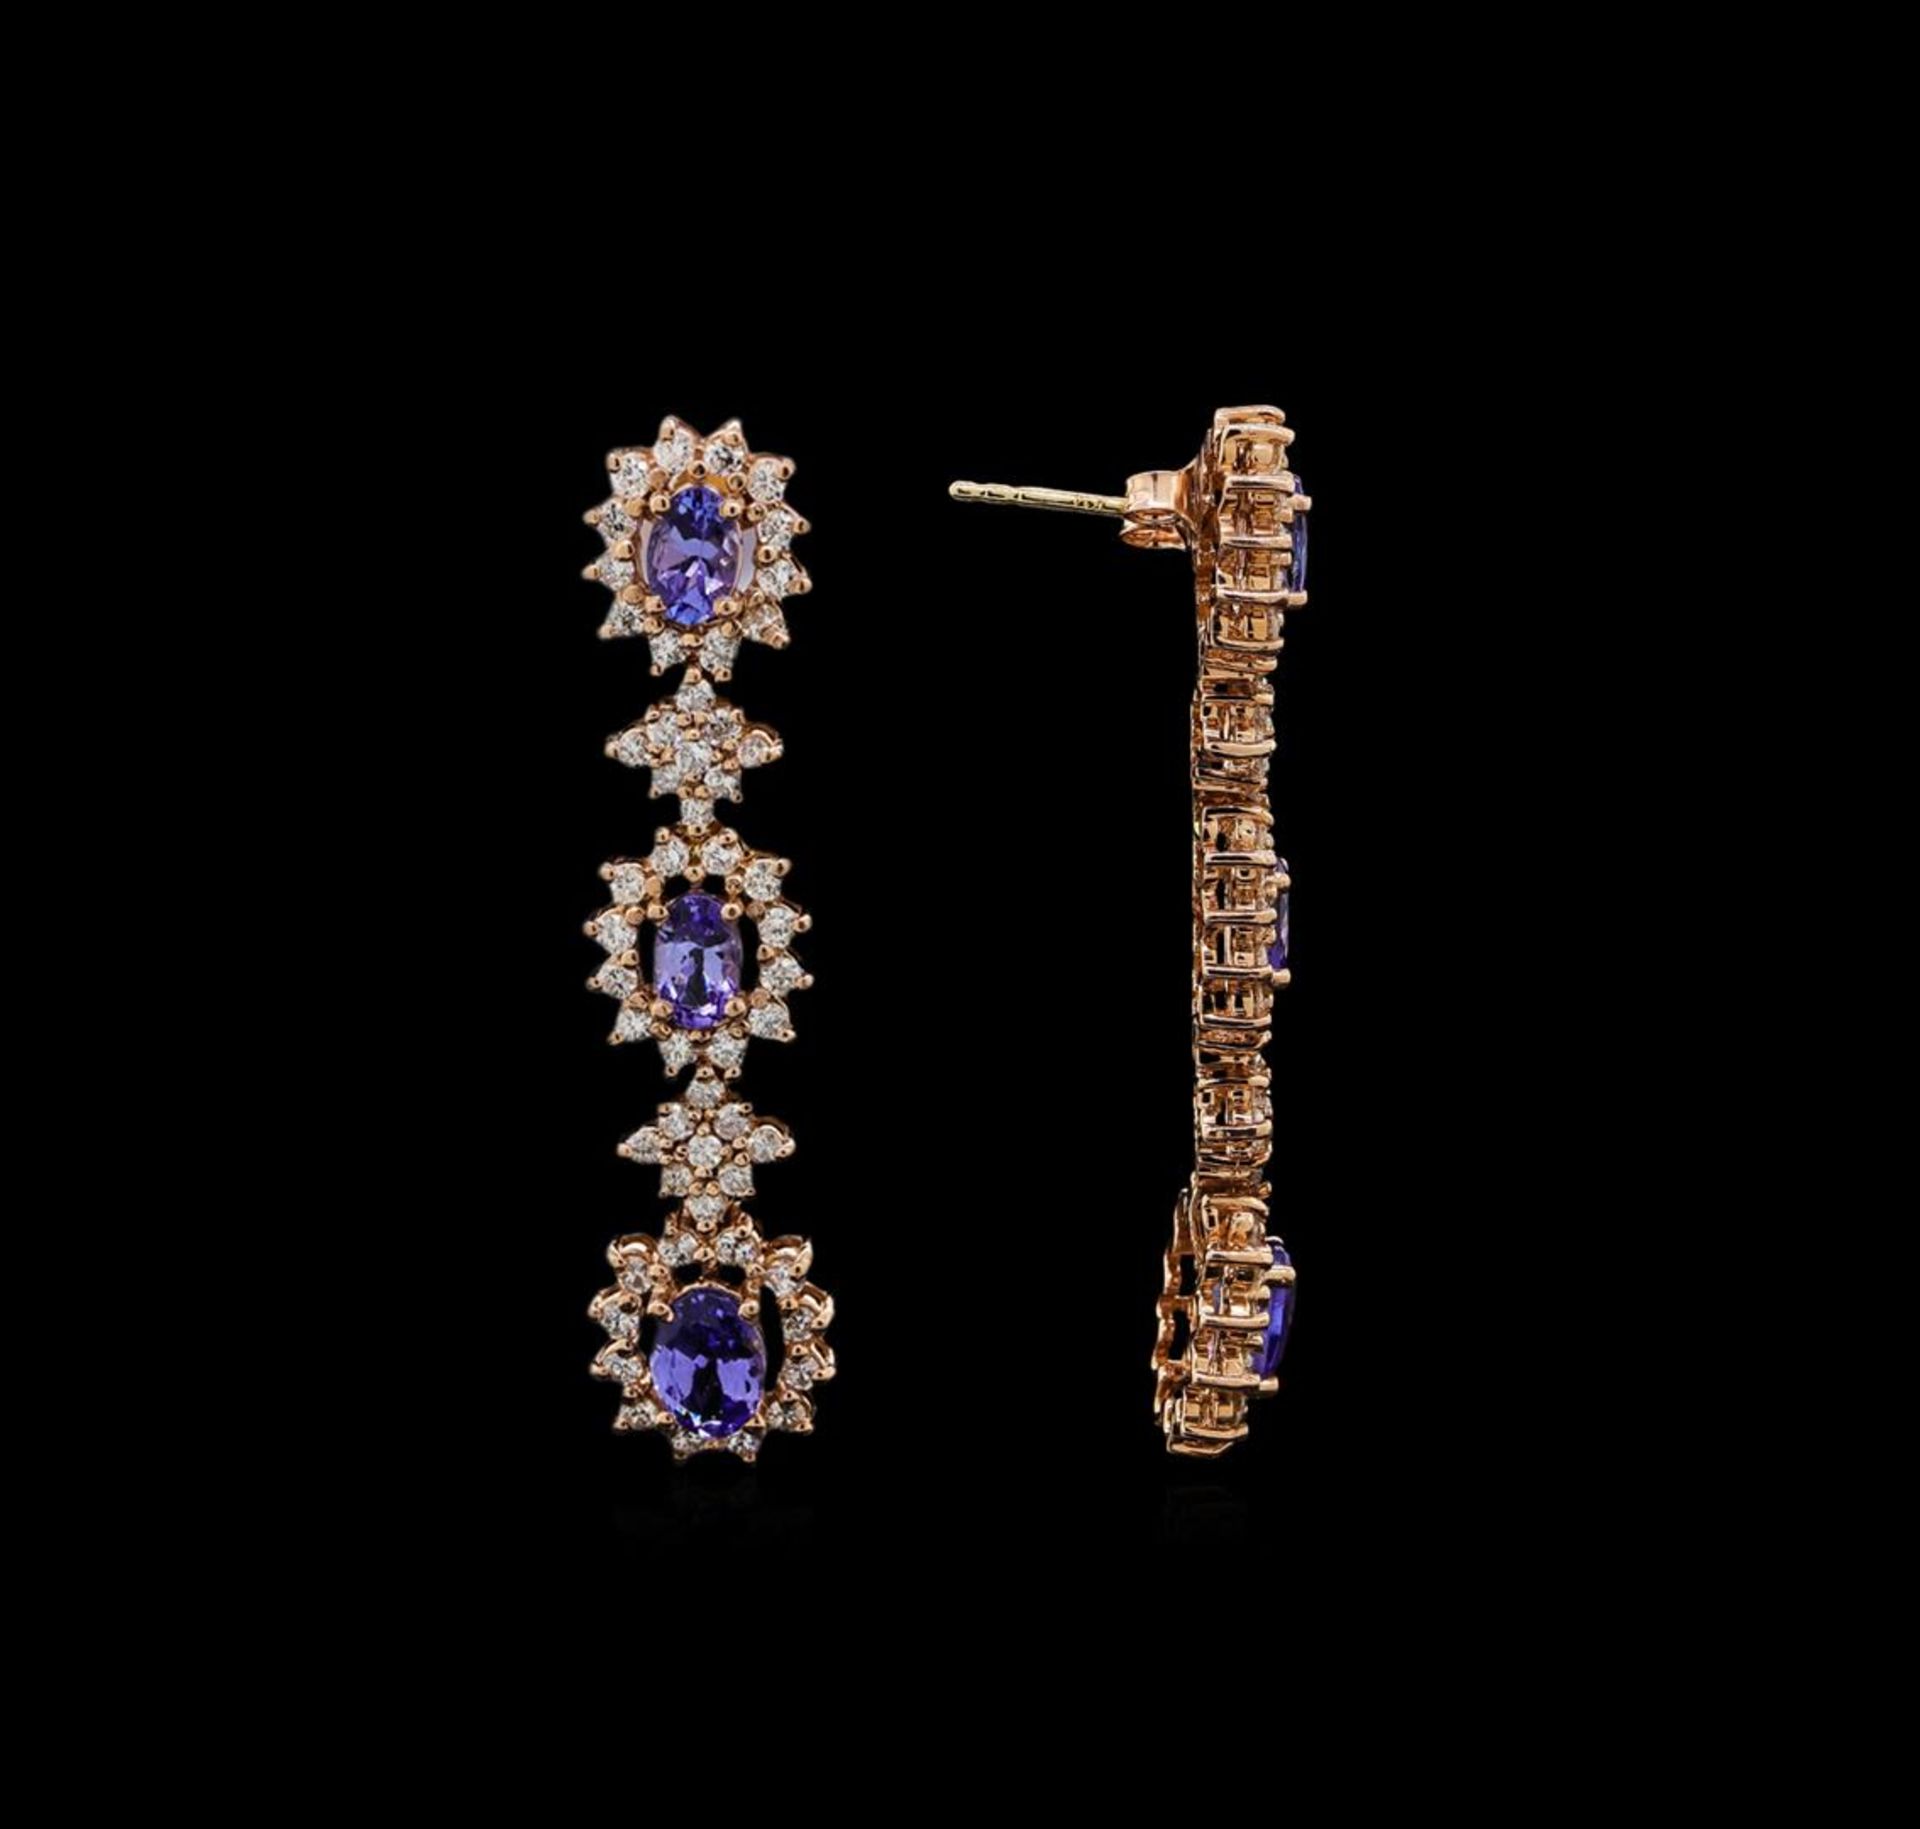 14KT Rose Gold 5.16 ctw Tanzanite and Diamond Earrings - Image 3 of 6